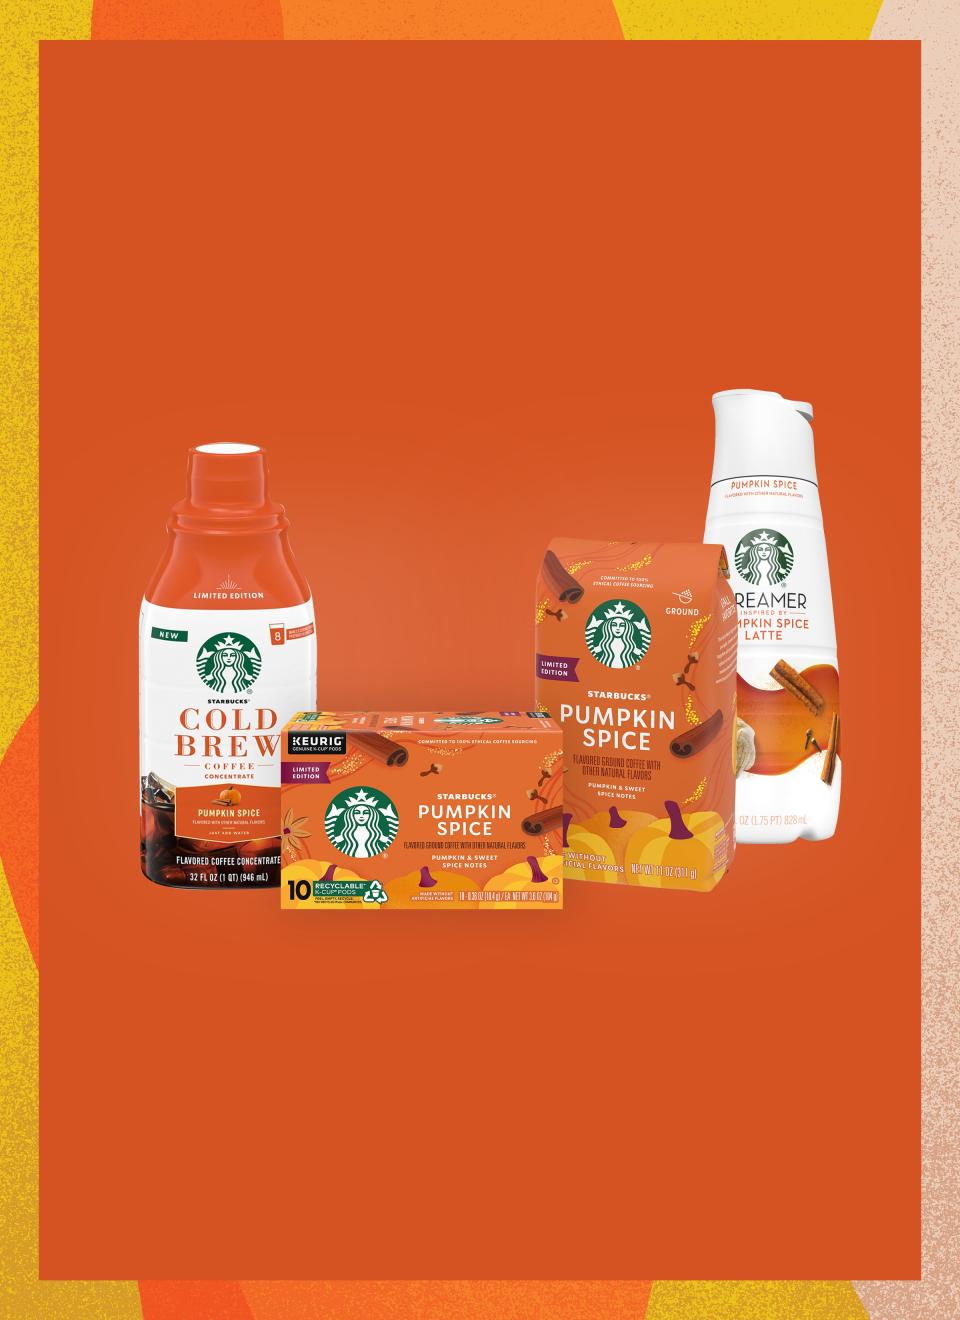 Twenty years ago, Starbucks began offering the seasonal drink, the Pumpkin Spice Latte. Since then, the company has launched a variety of Pumpkin Spice products.